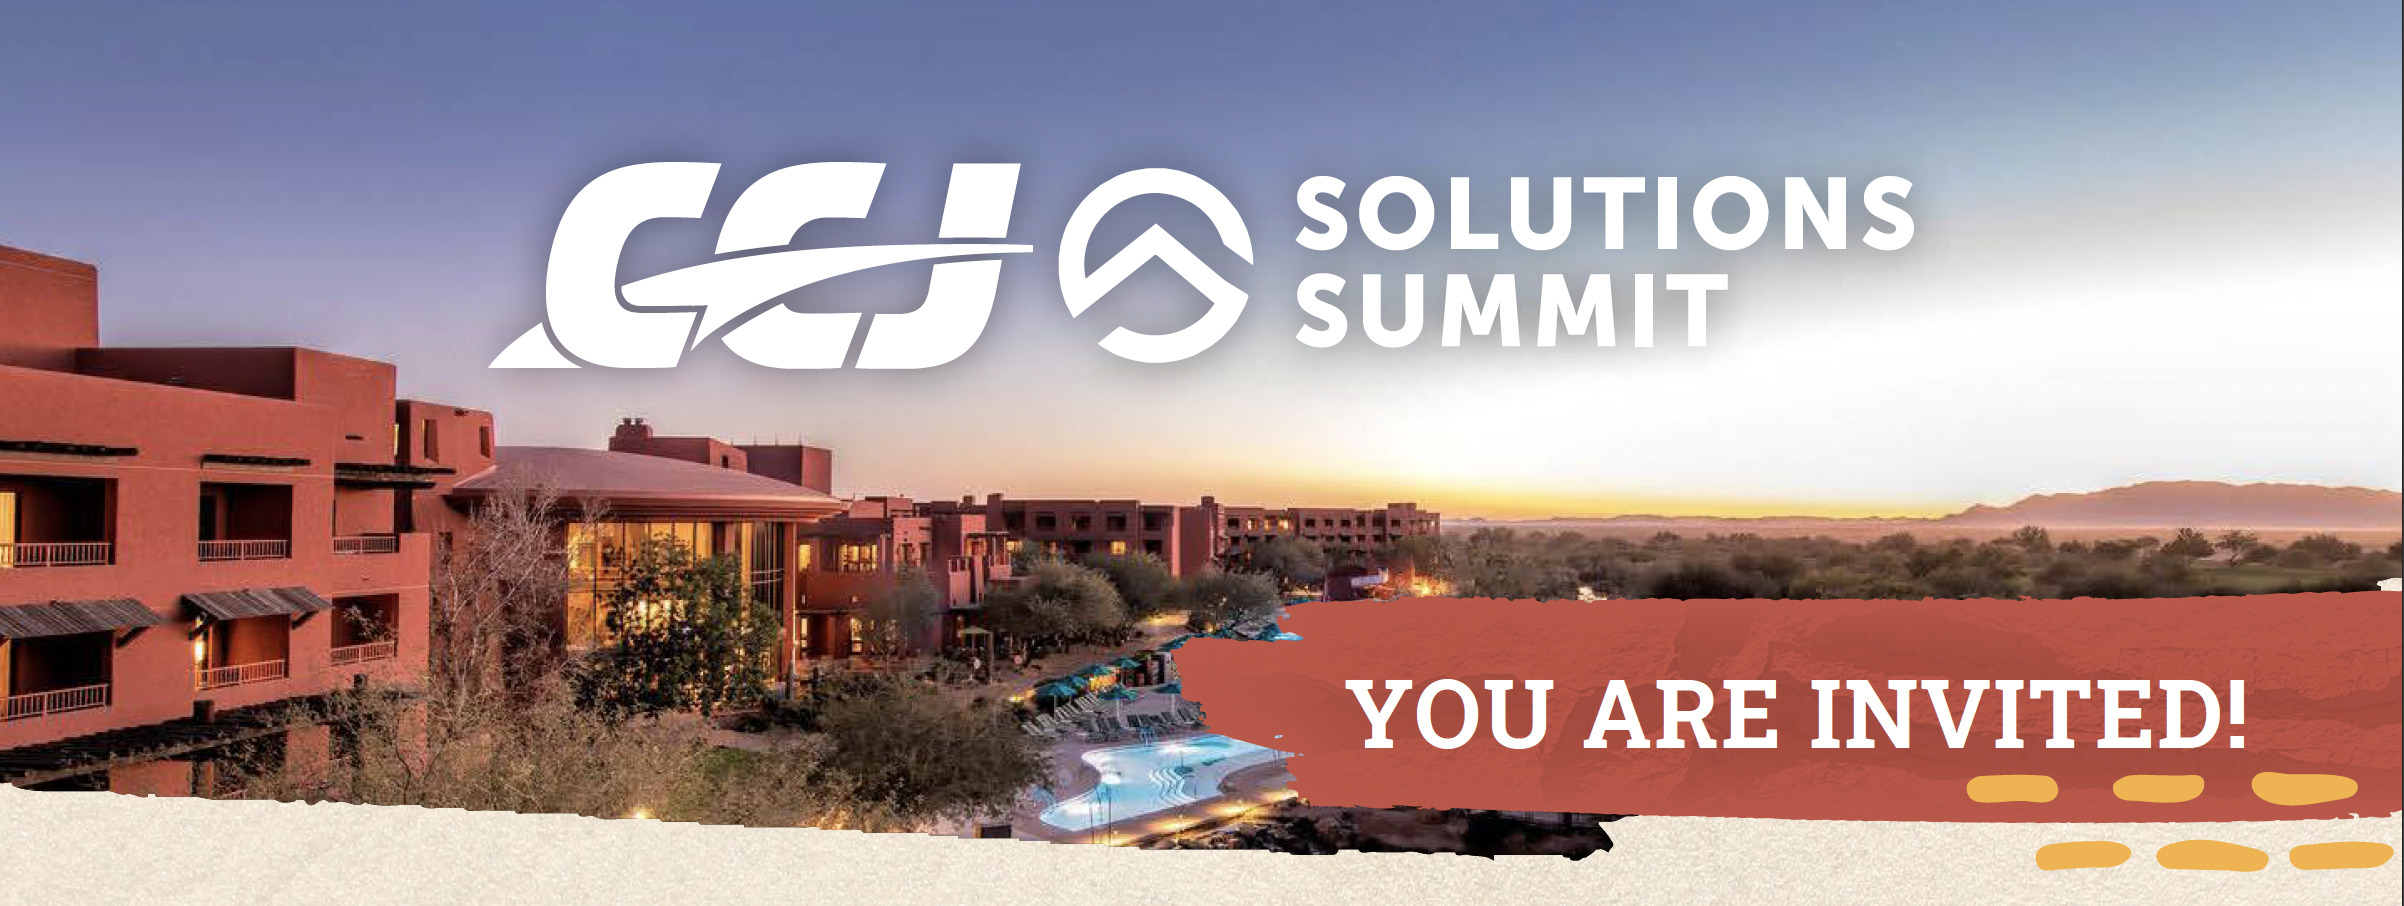 ATA And CCJ Invite You To The 2021 CCJ Solutions Summit